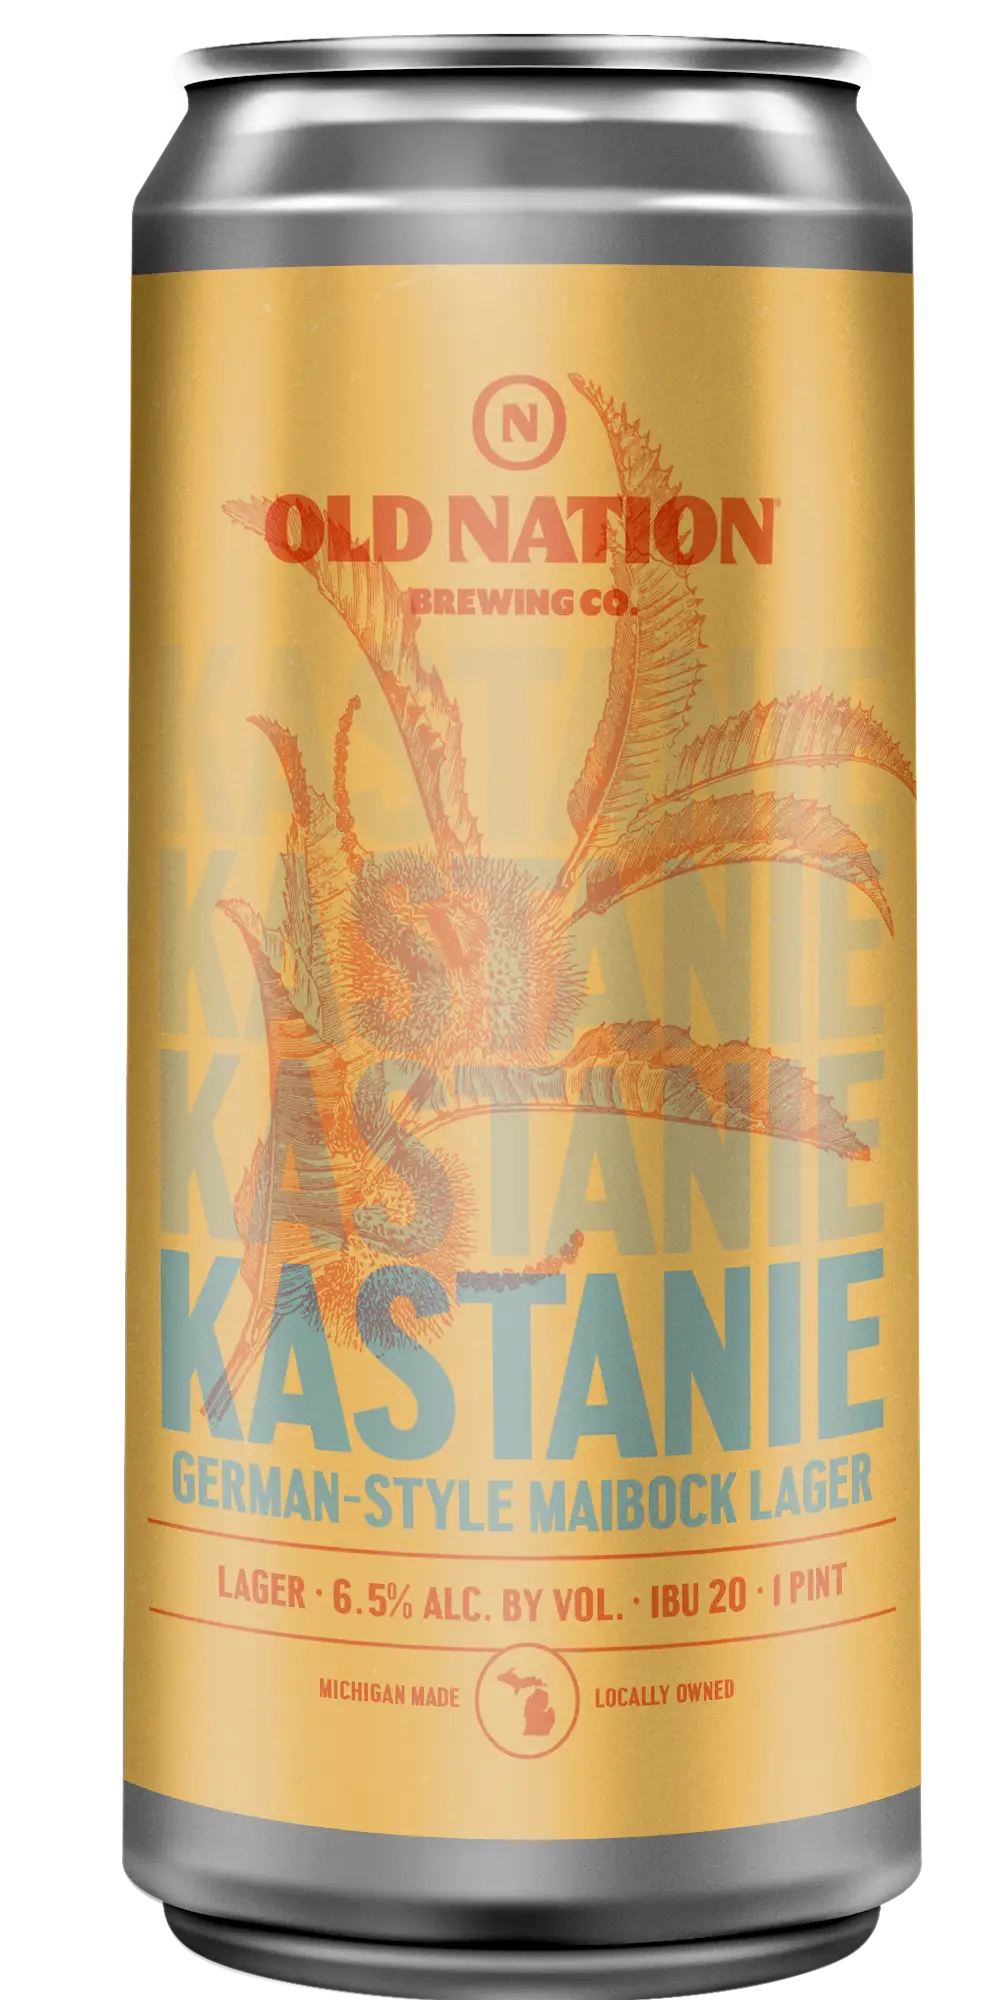 Old Nation Kastanie beer in an aluminum can. Drawing of a chestnut and leaves on the can label.